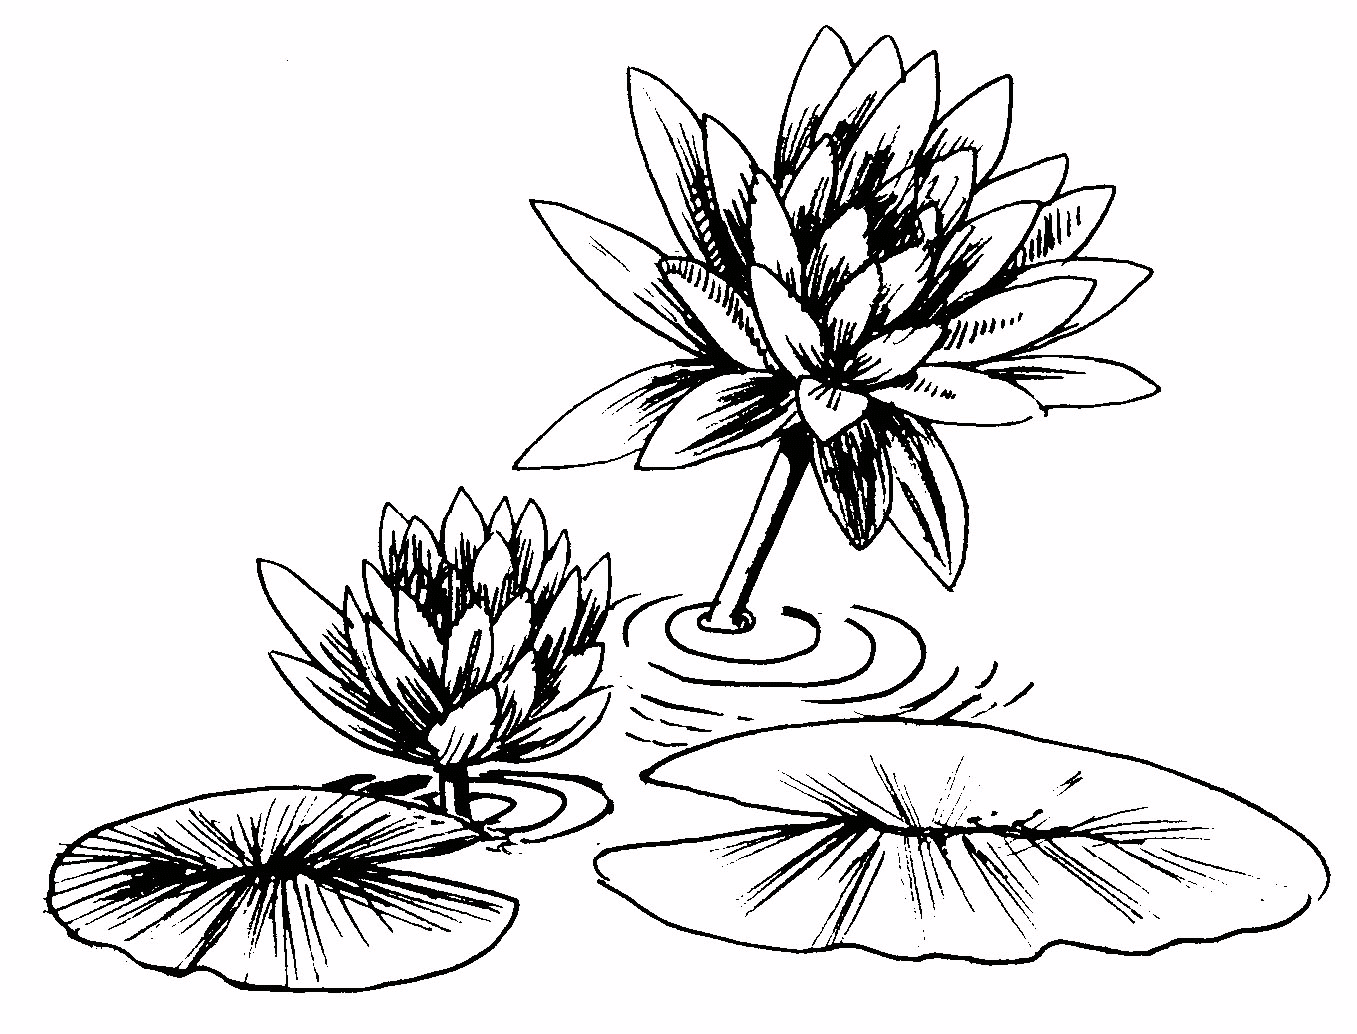 Lily pads coloring pages - Coloring Pages & Pictures - IMAGIXS